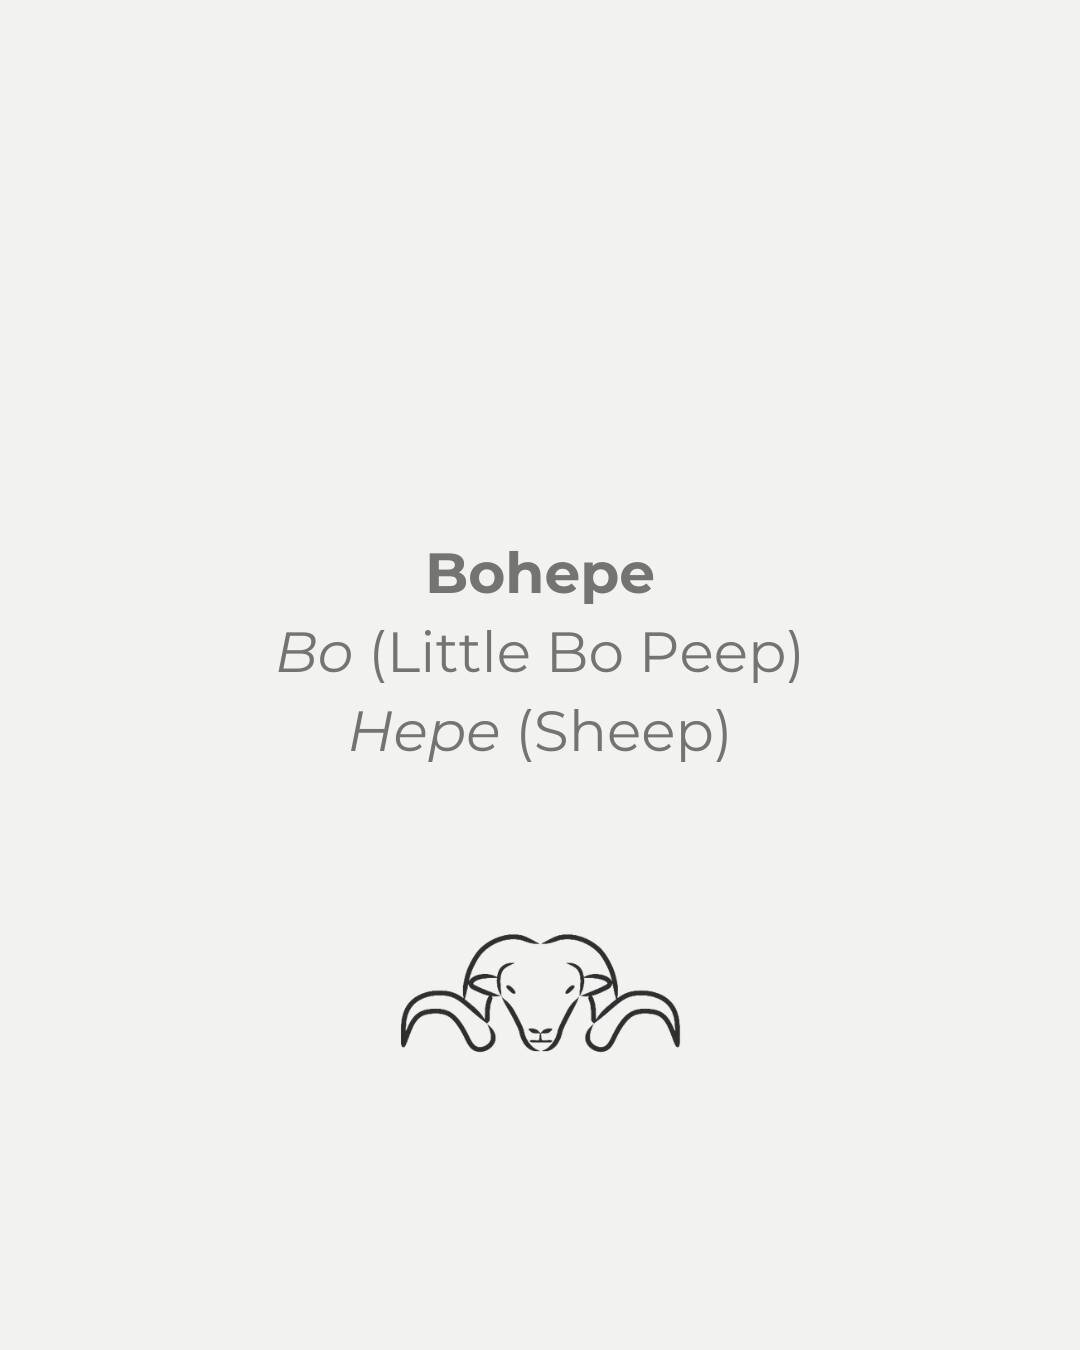 &ldquo;Little Bo Peep has lost her sheep and doesn&rsquo;t know where to find them. Leave them alone and they will come home, wagging their tails behind them.&rdquo;

We named these sheep Bohepe to reflect the link between their wild origin and how t